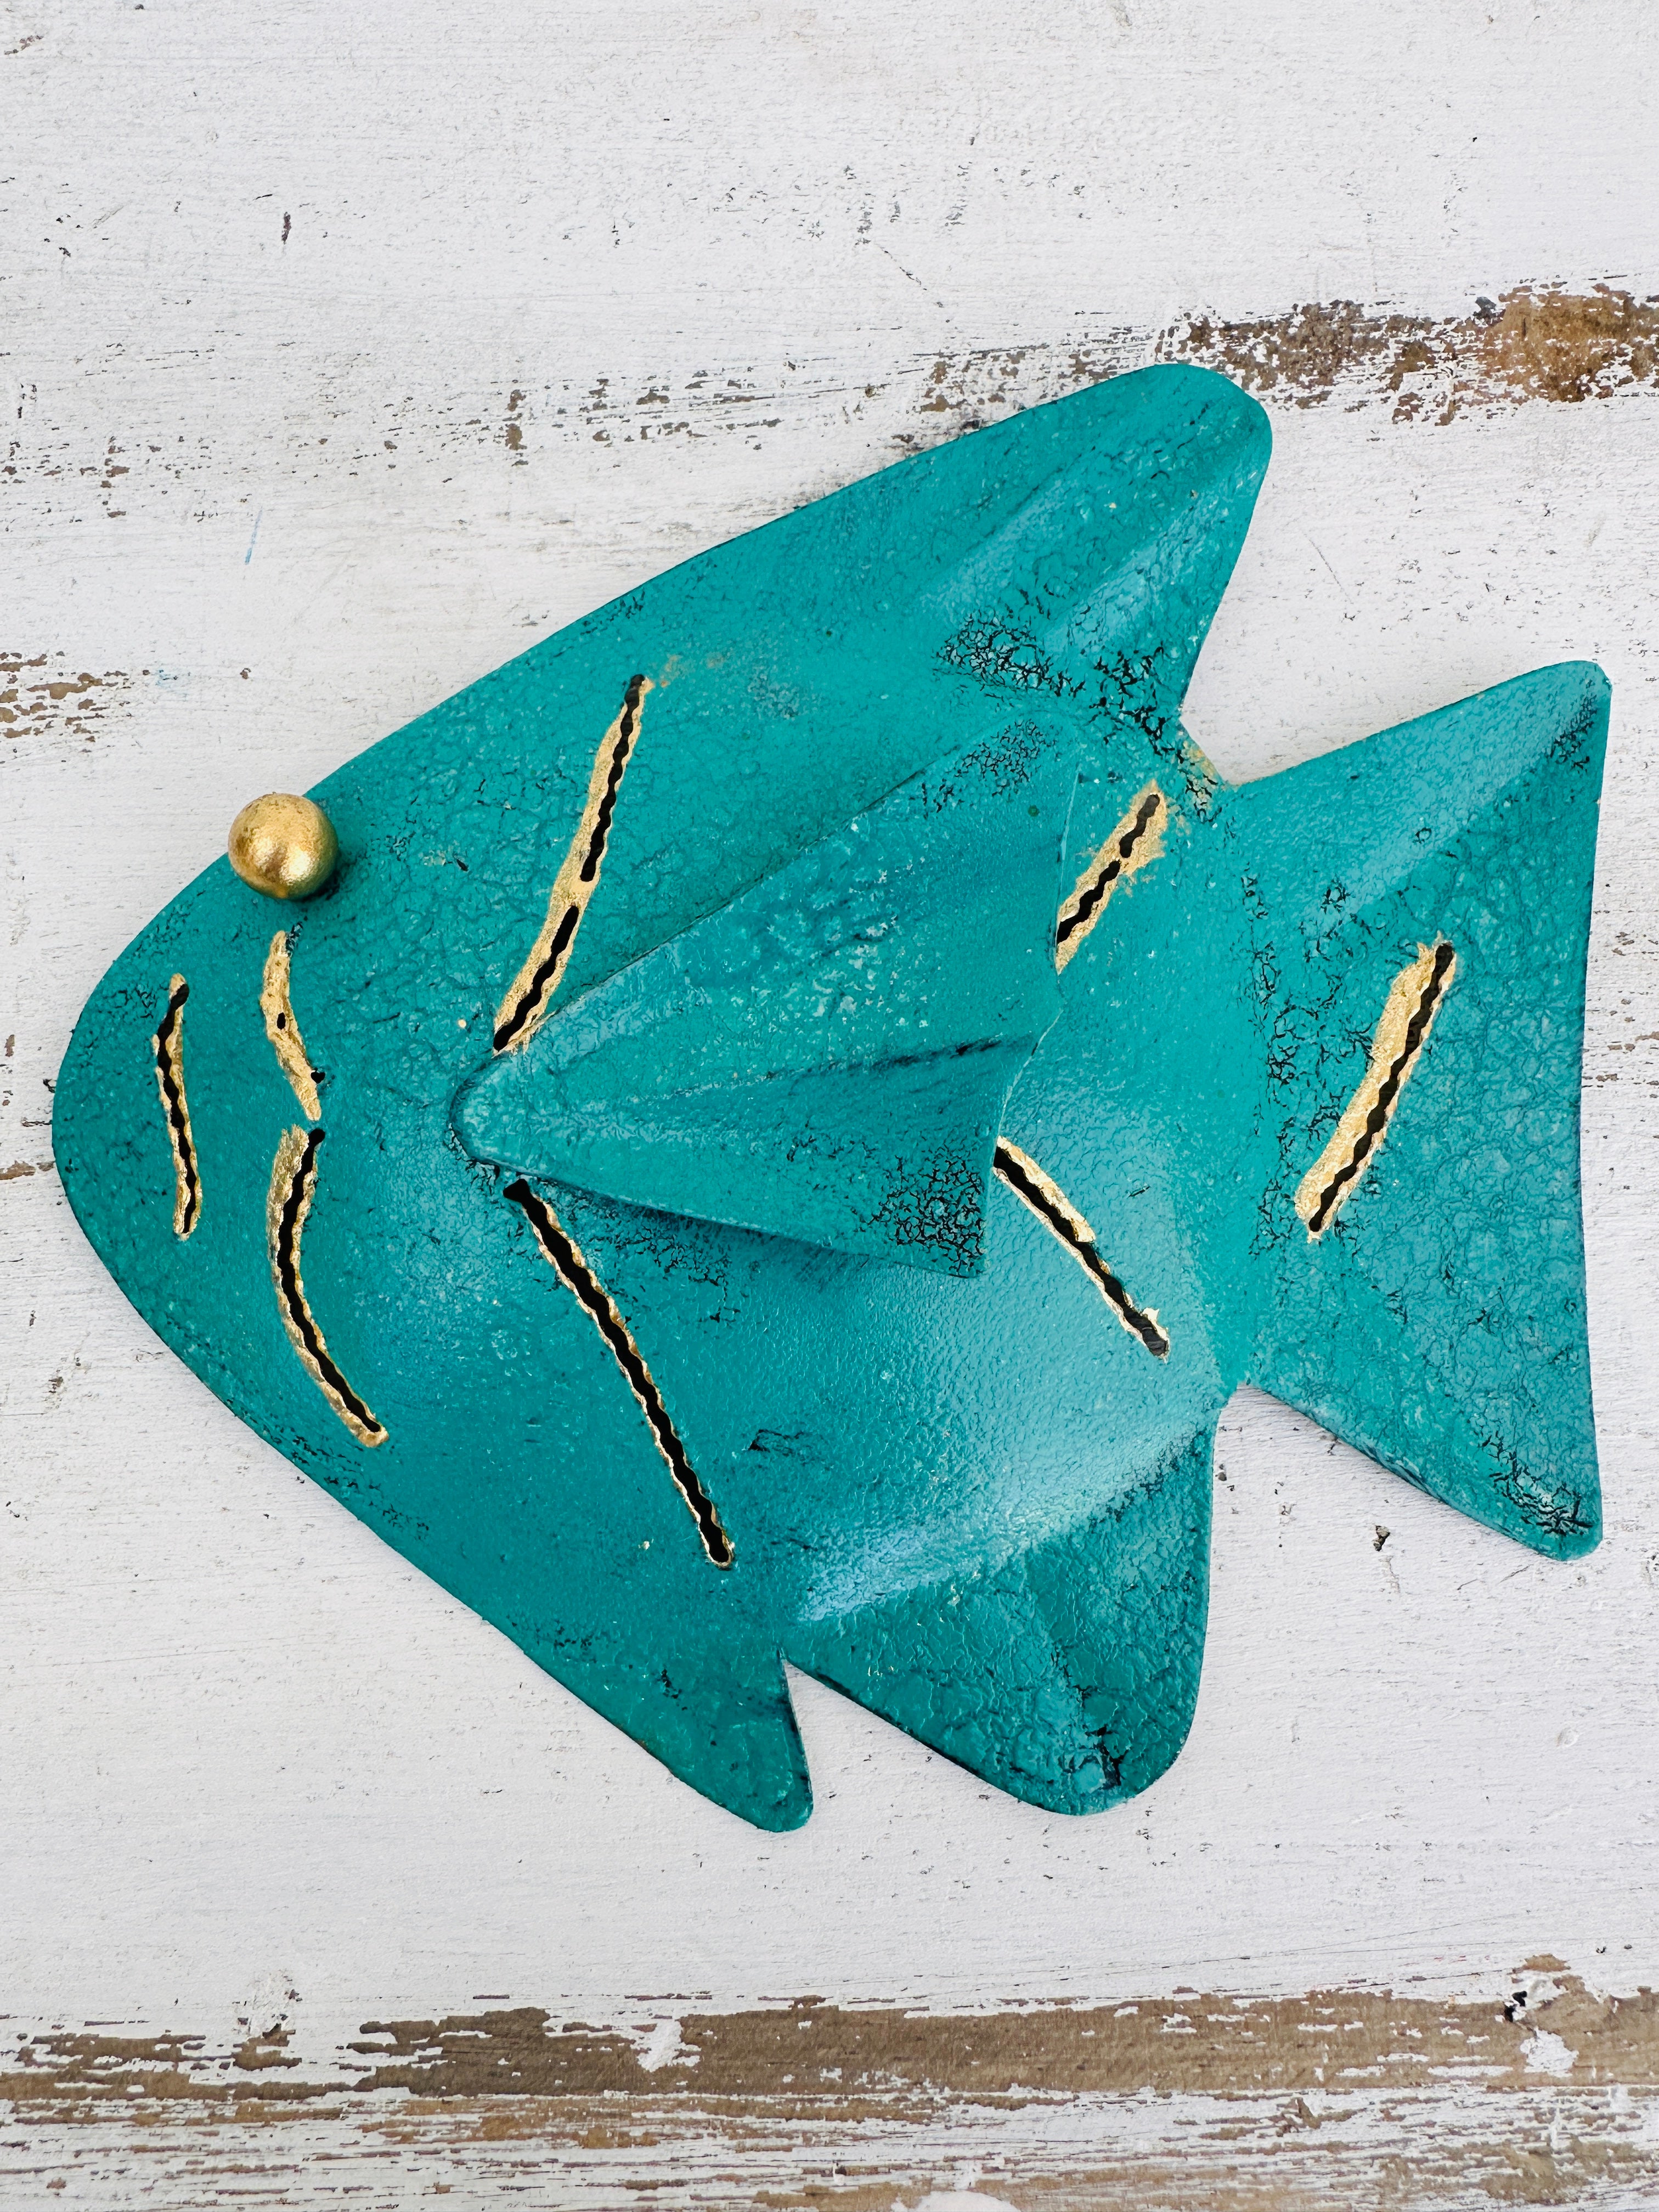 aerial view of single metal fish in turquoise